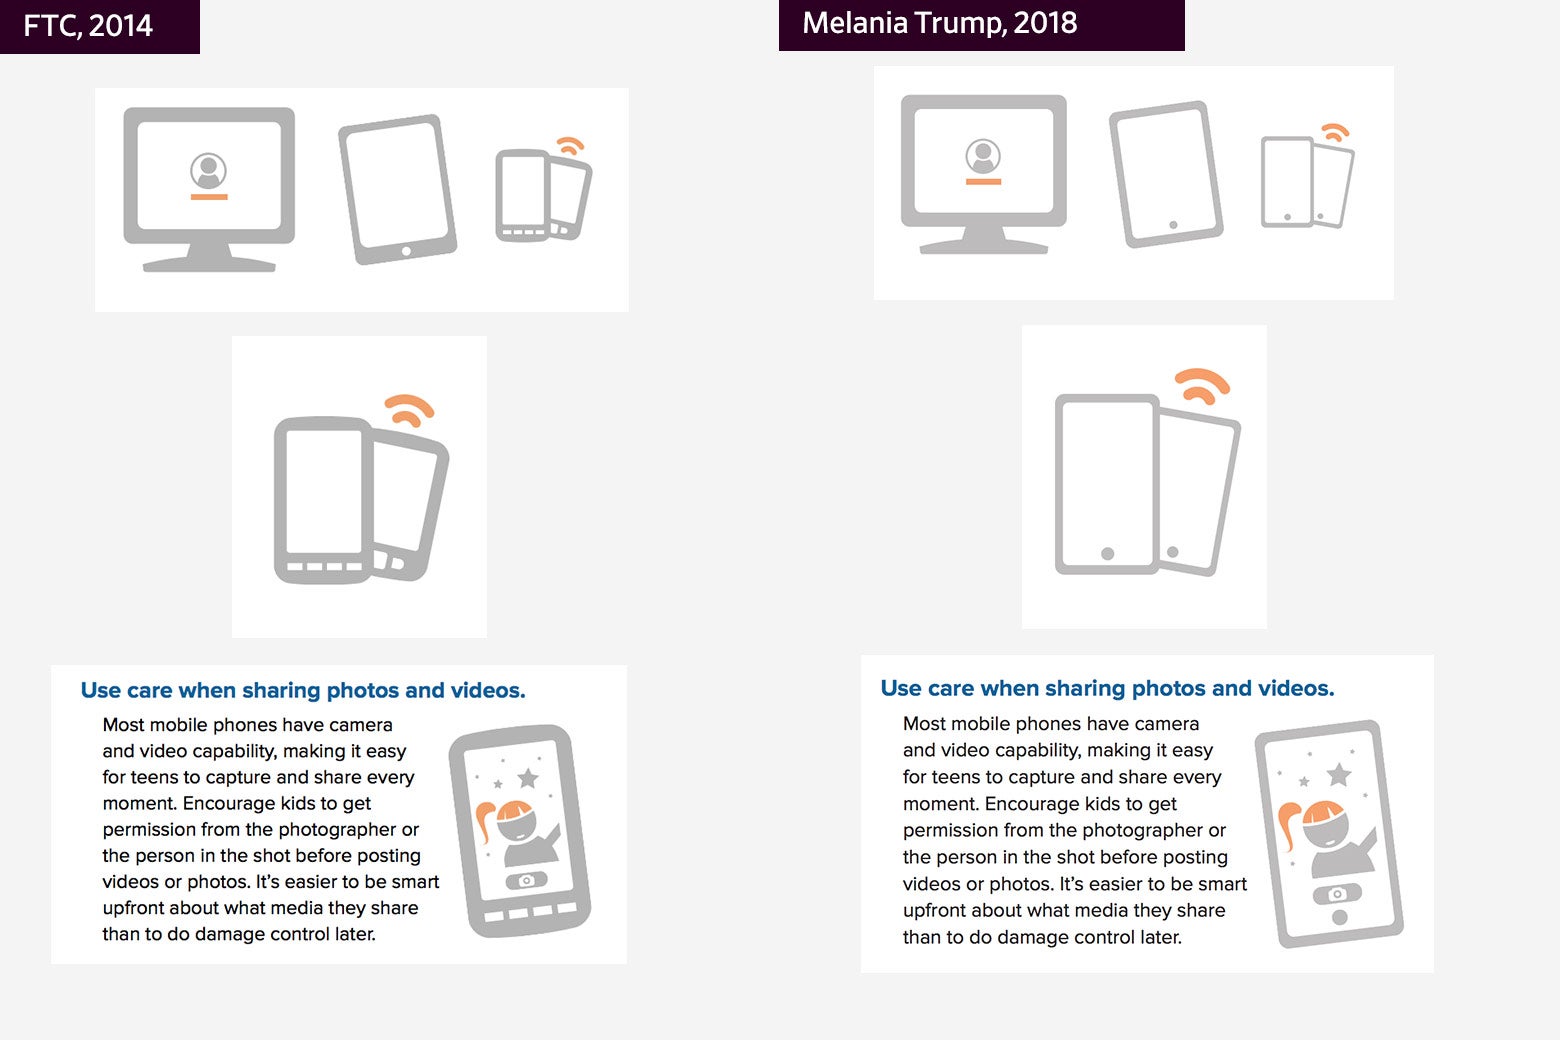 Side-by-side booklet pages that are identical but for small graphical changes to images of cell phones.